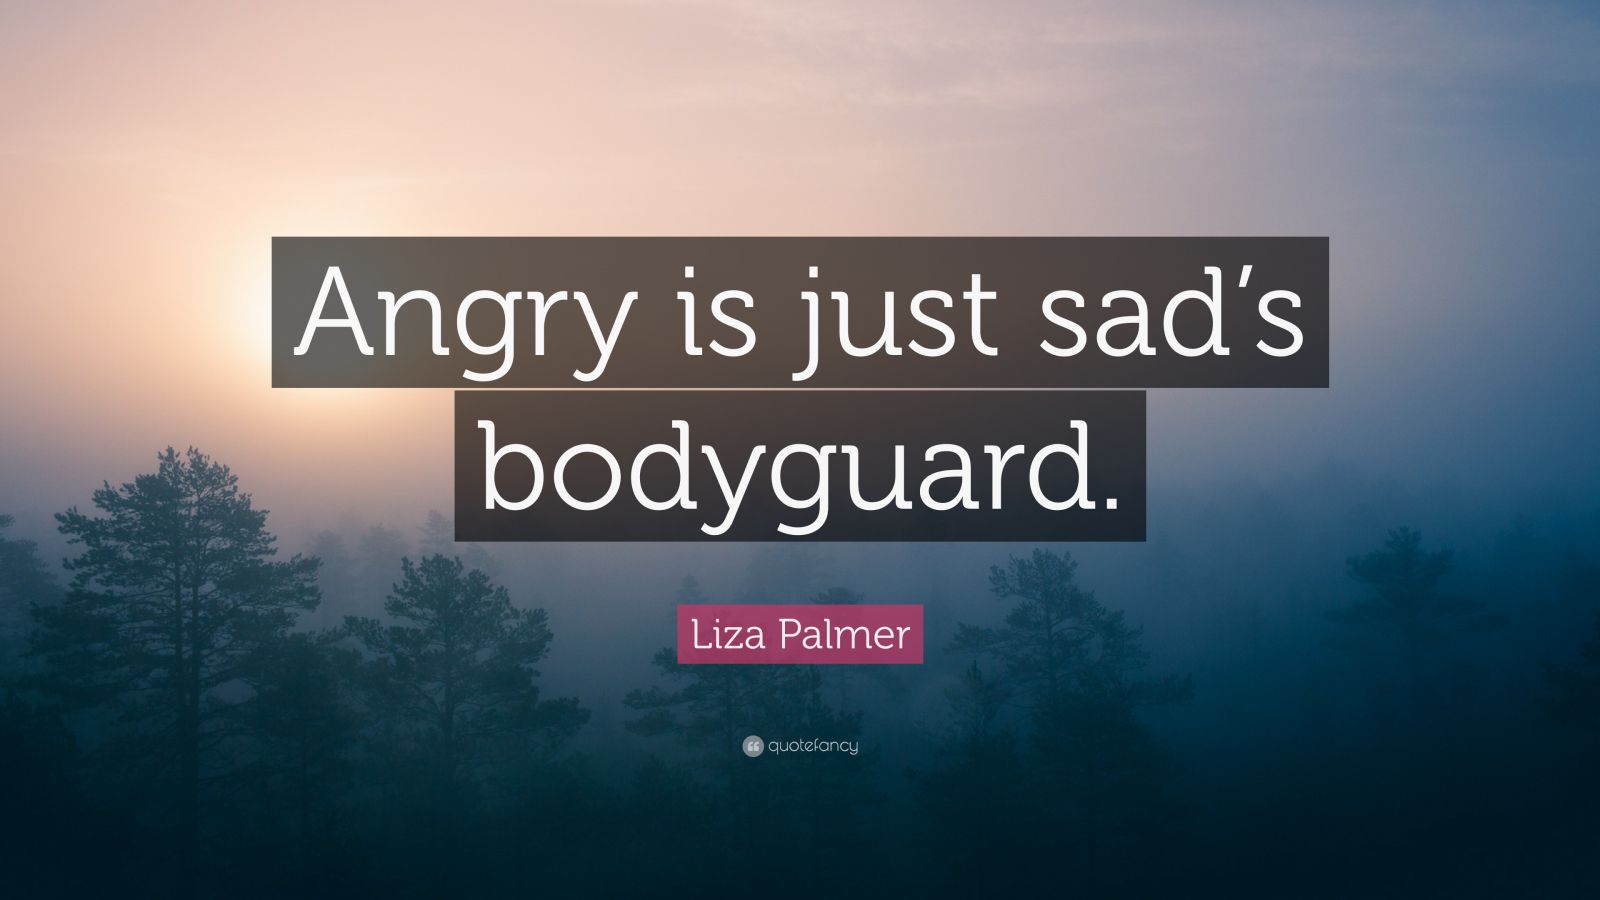 Liza Palmer Quote: “Angry is just sad's bodyguard.”